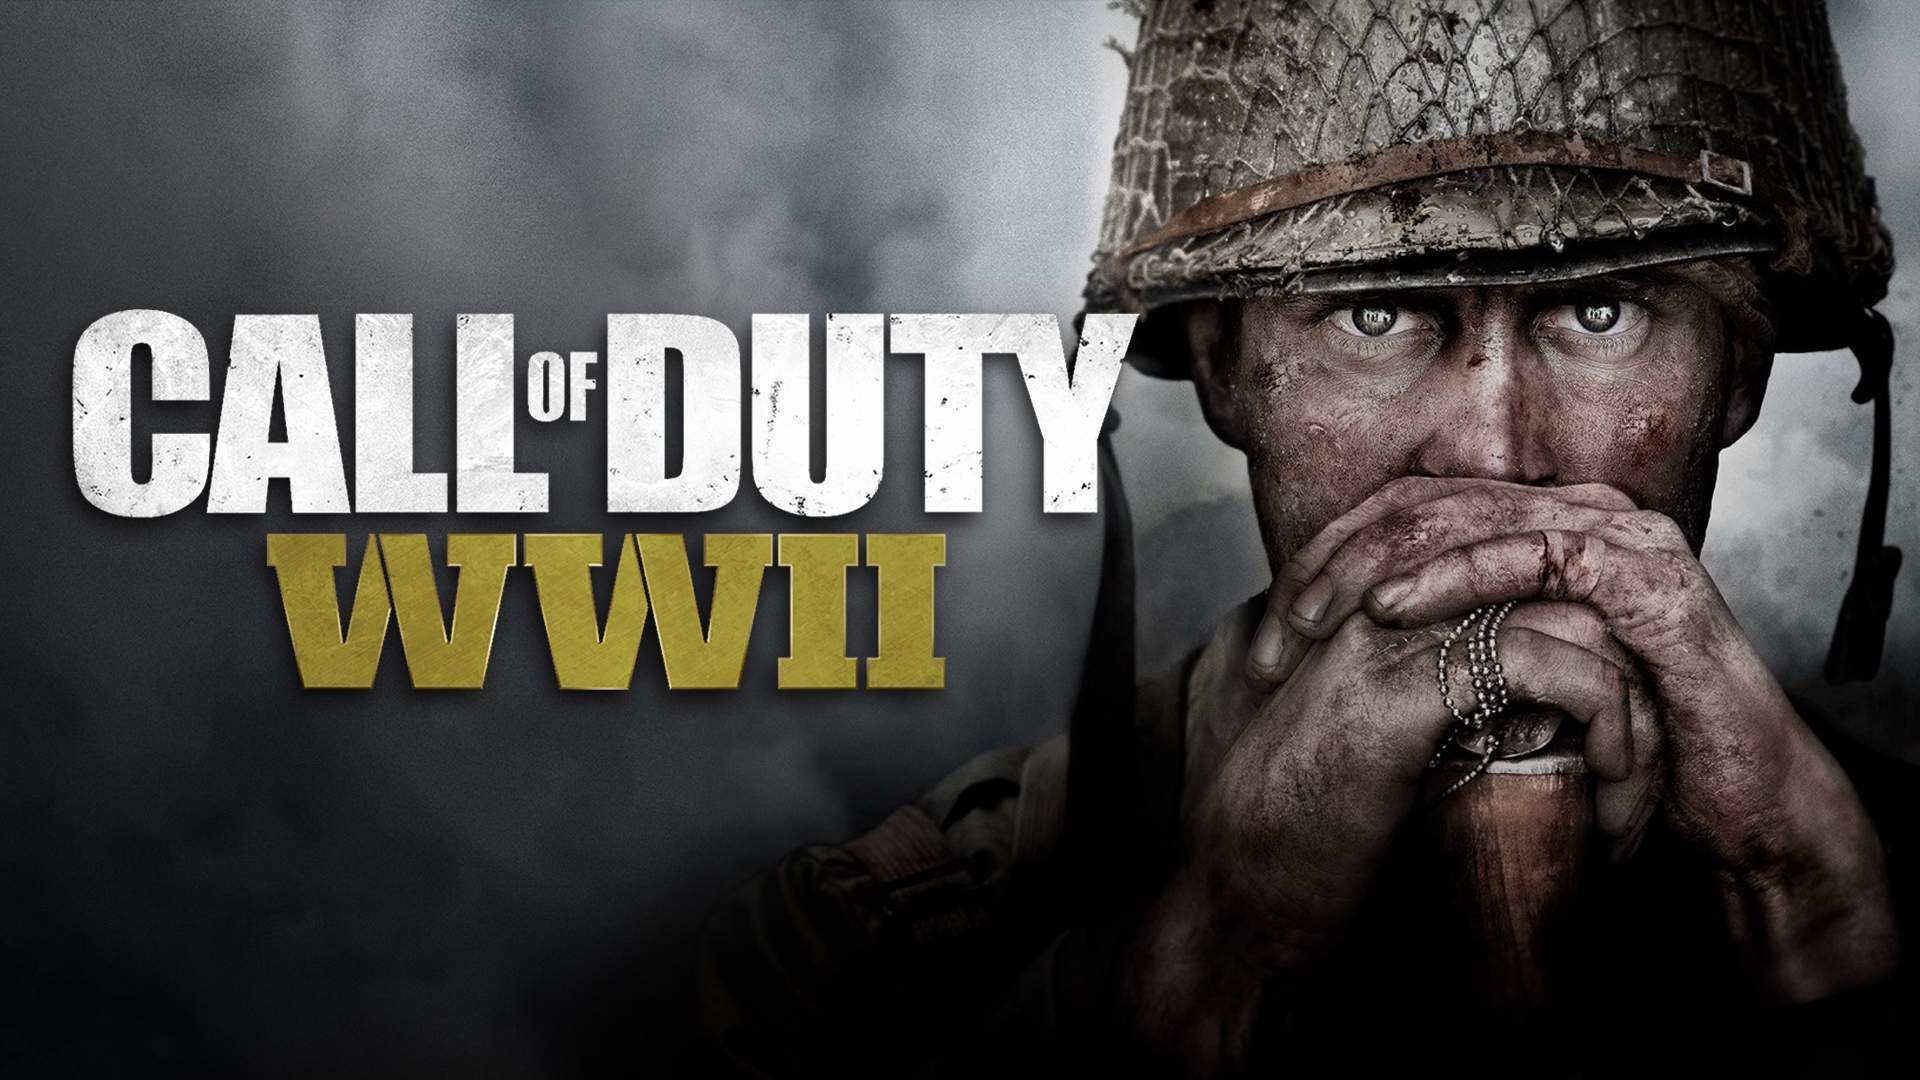 call_of_duty_WWII_wallpaper_logo_nat_games